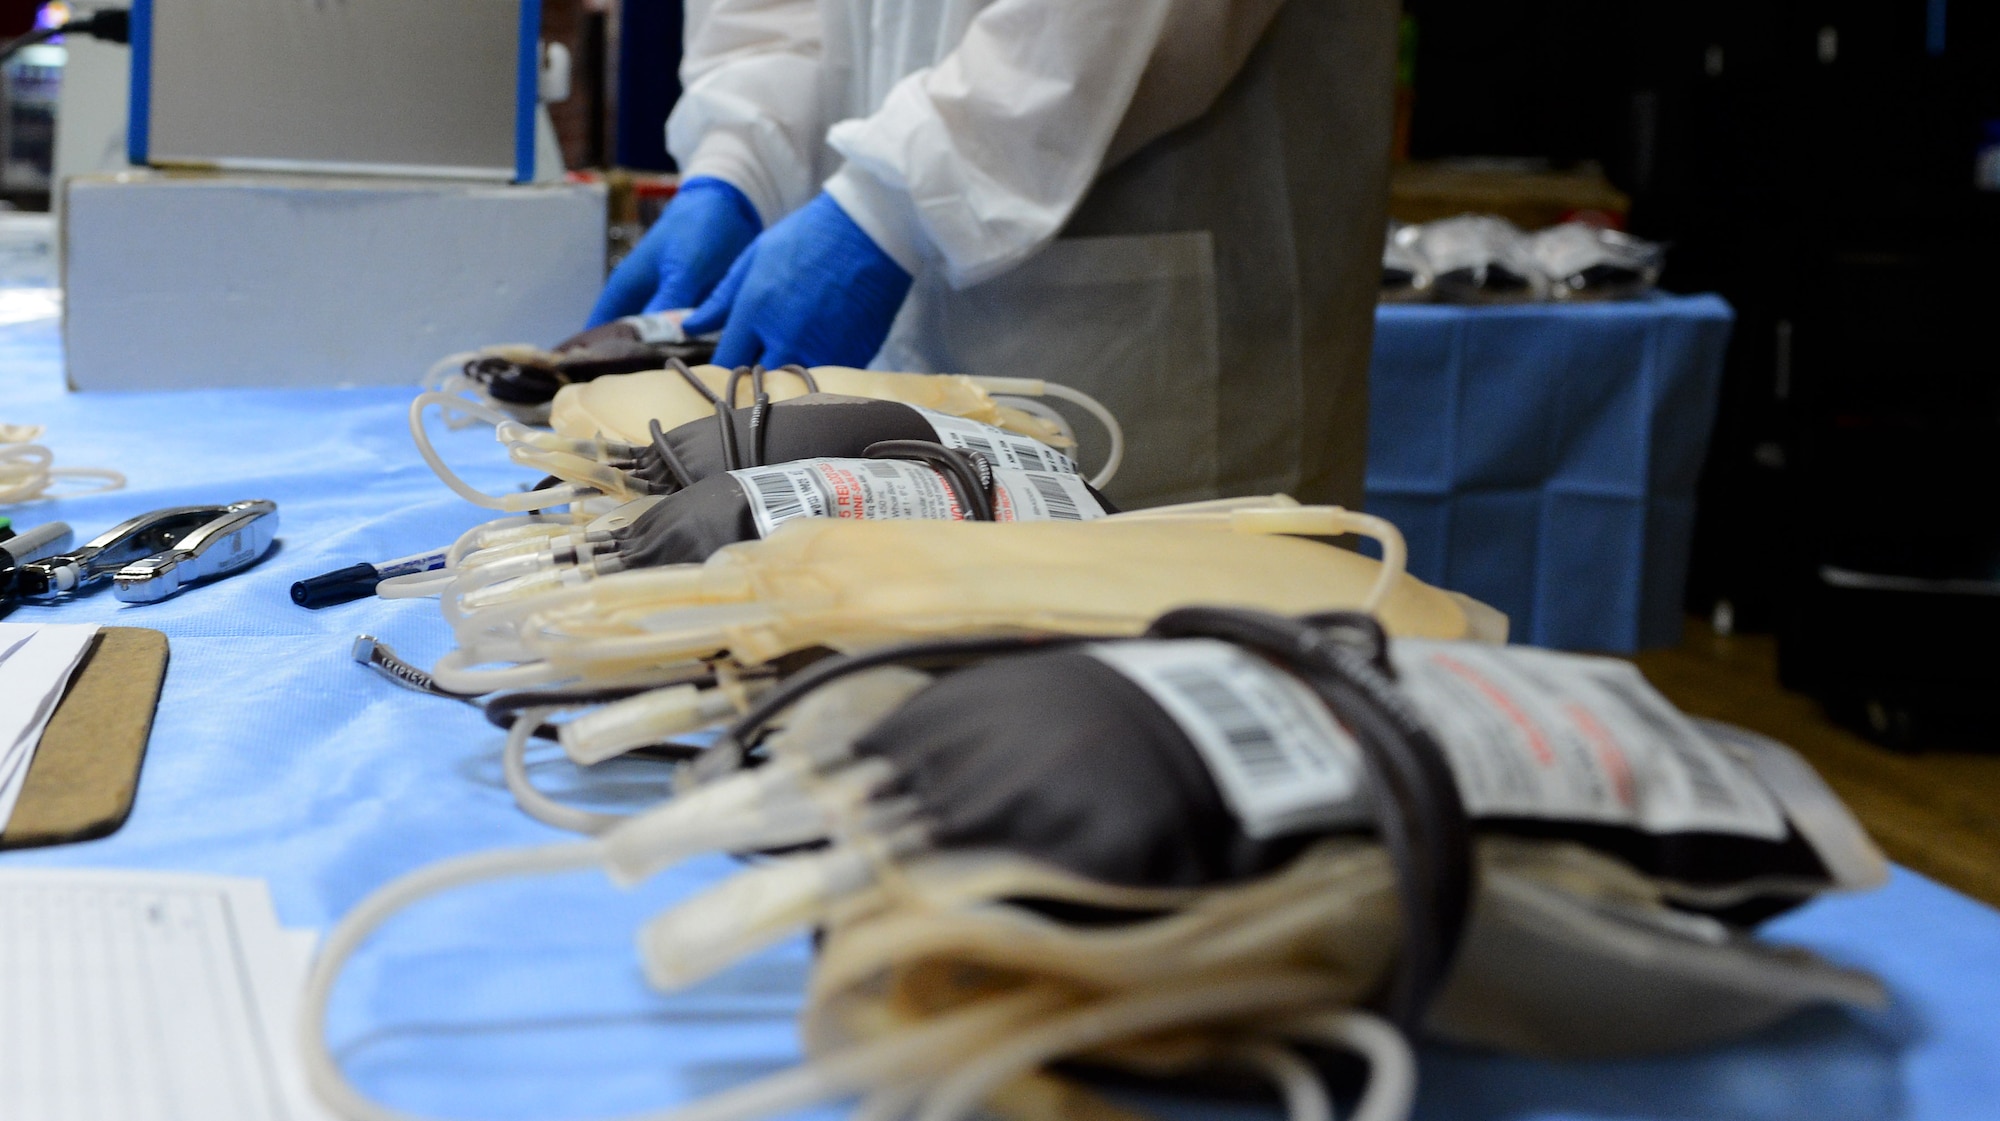 A Landstuhl Regional Medical Center laboratory technician organizes bags of blood during an Armed Services Blood Program blood drive at the Brick House in the community center on Spangdahlem Air Base, Germany, Jan. 20, 2015. An ASBP blood drive accumulates nearly 50 units of blood on average during site visits. (U.S. Air Force photo by Airman 1st Class Luke Kitterman/Released)